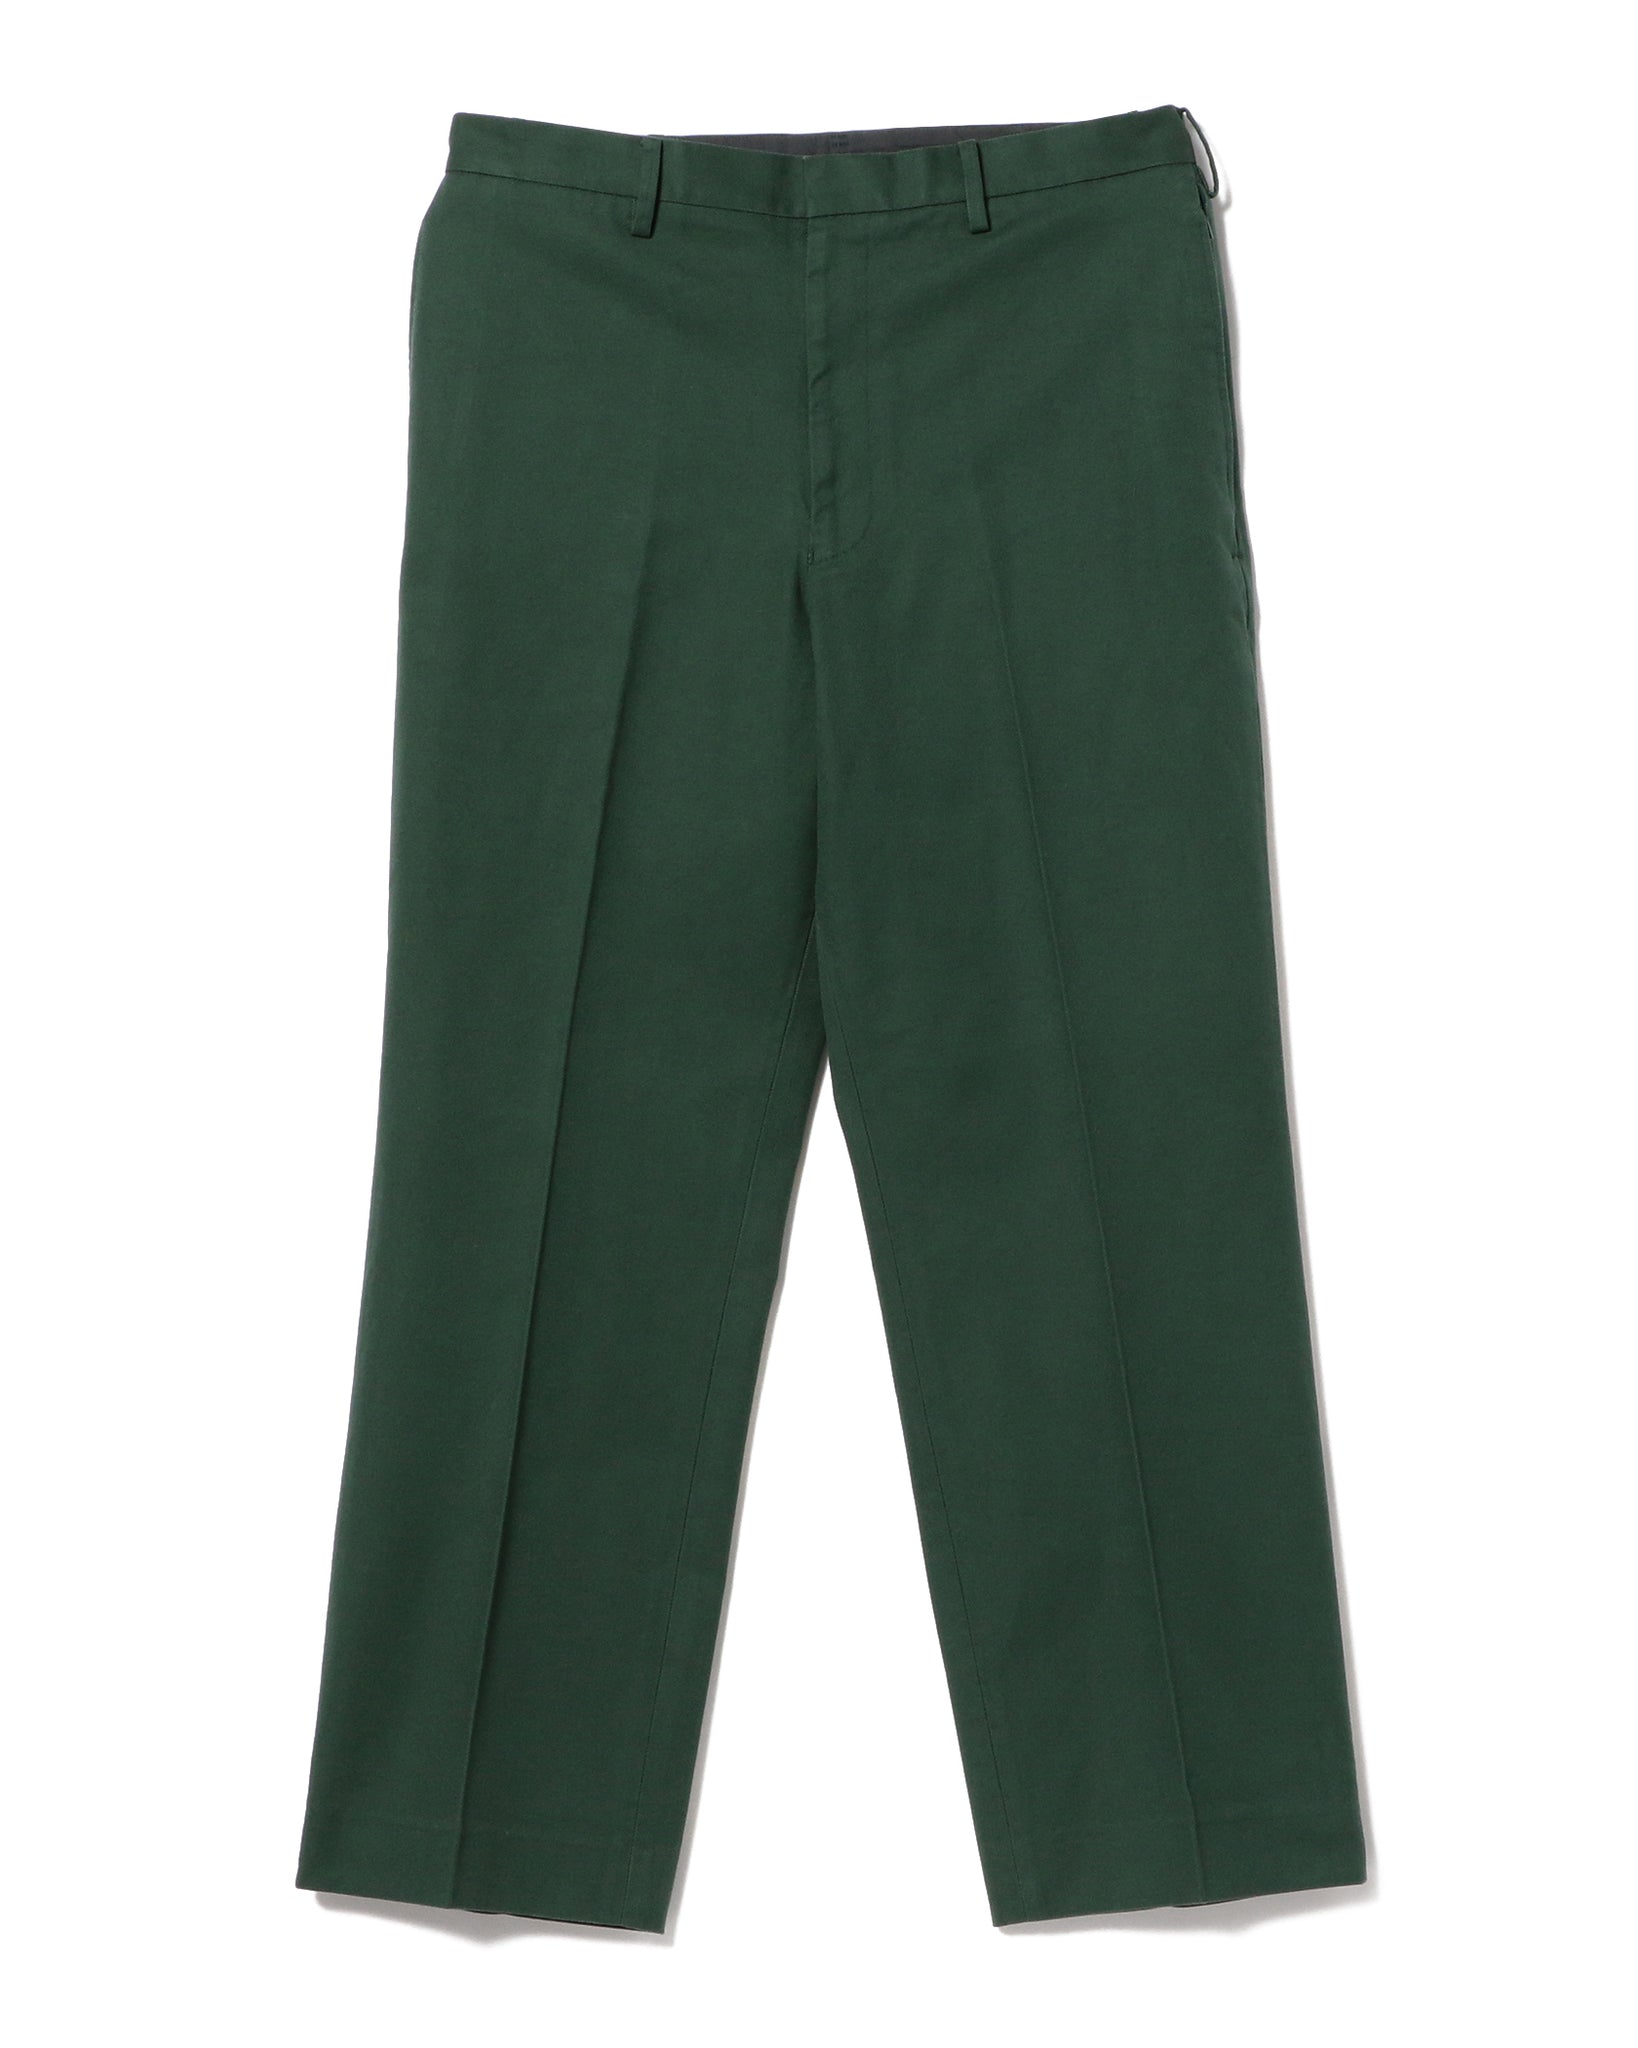 Mobley Straight Pant